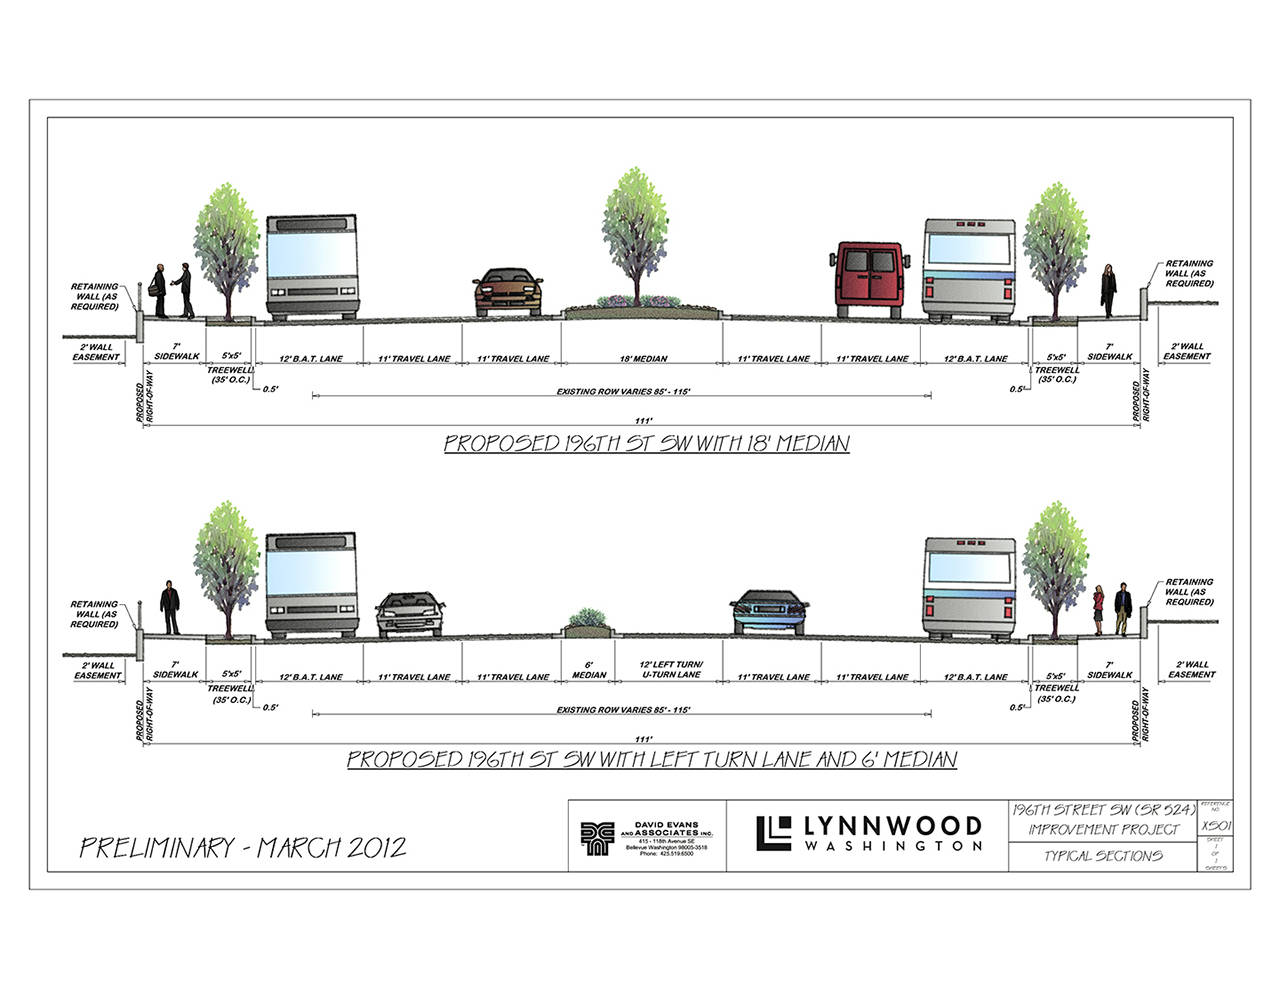 The city of Lynnwood plans to overhaul 196th Street SW, adding lanes and aiming for a more “downtown” feel. (City of Lynnwood)